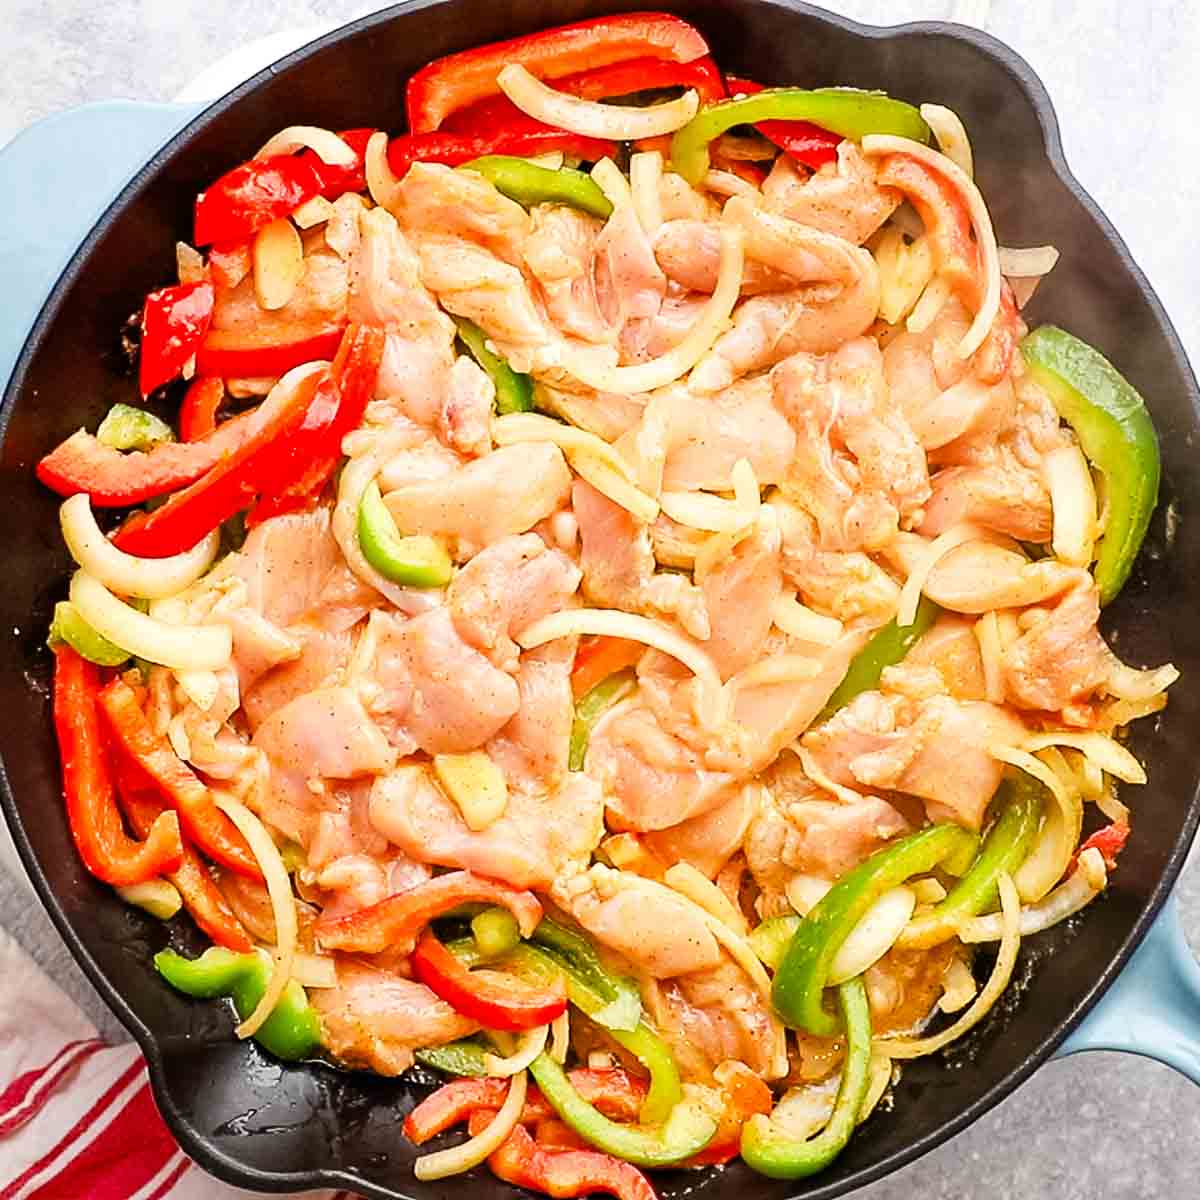 cooking chicken fajitas on a cast iron skillet